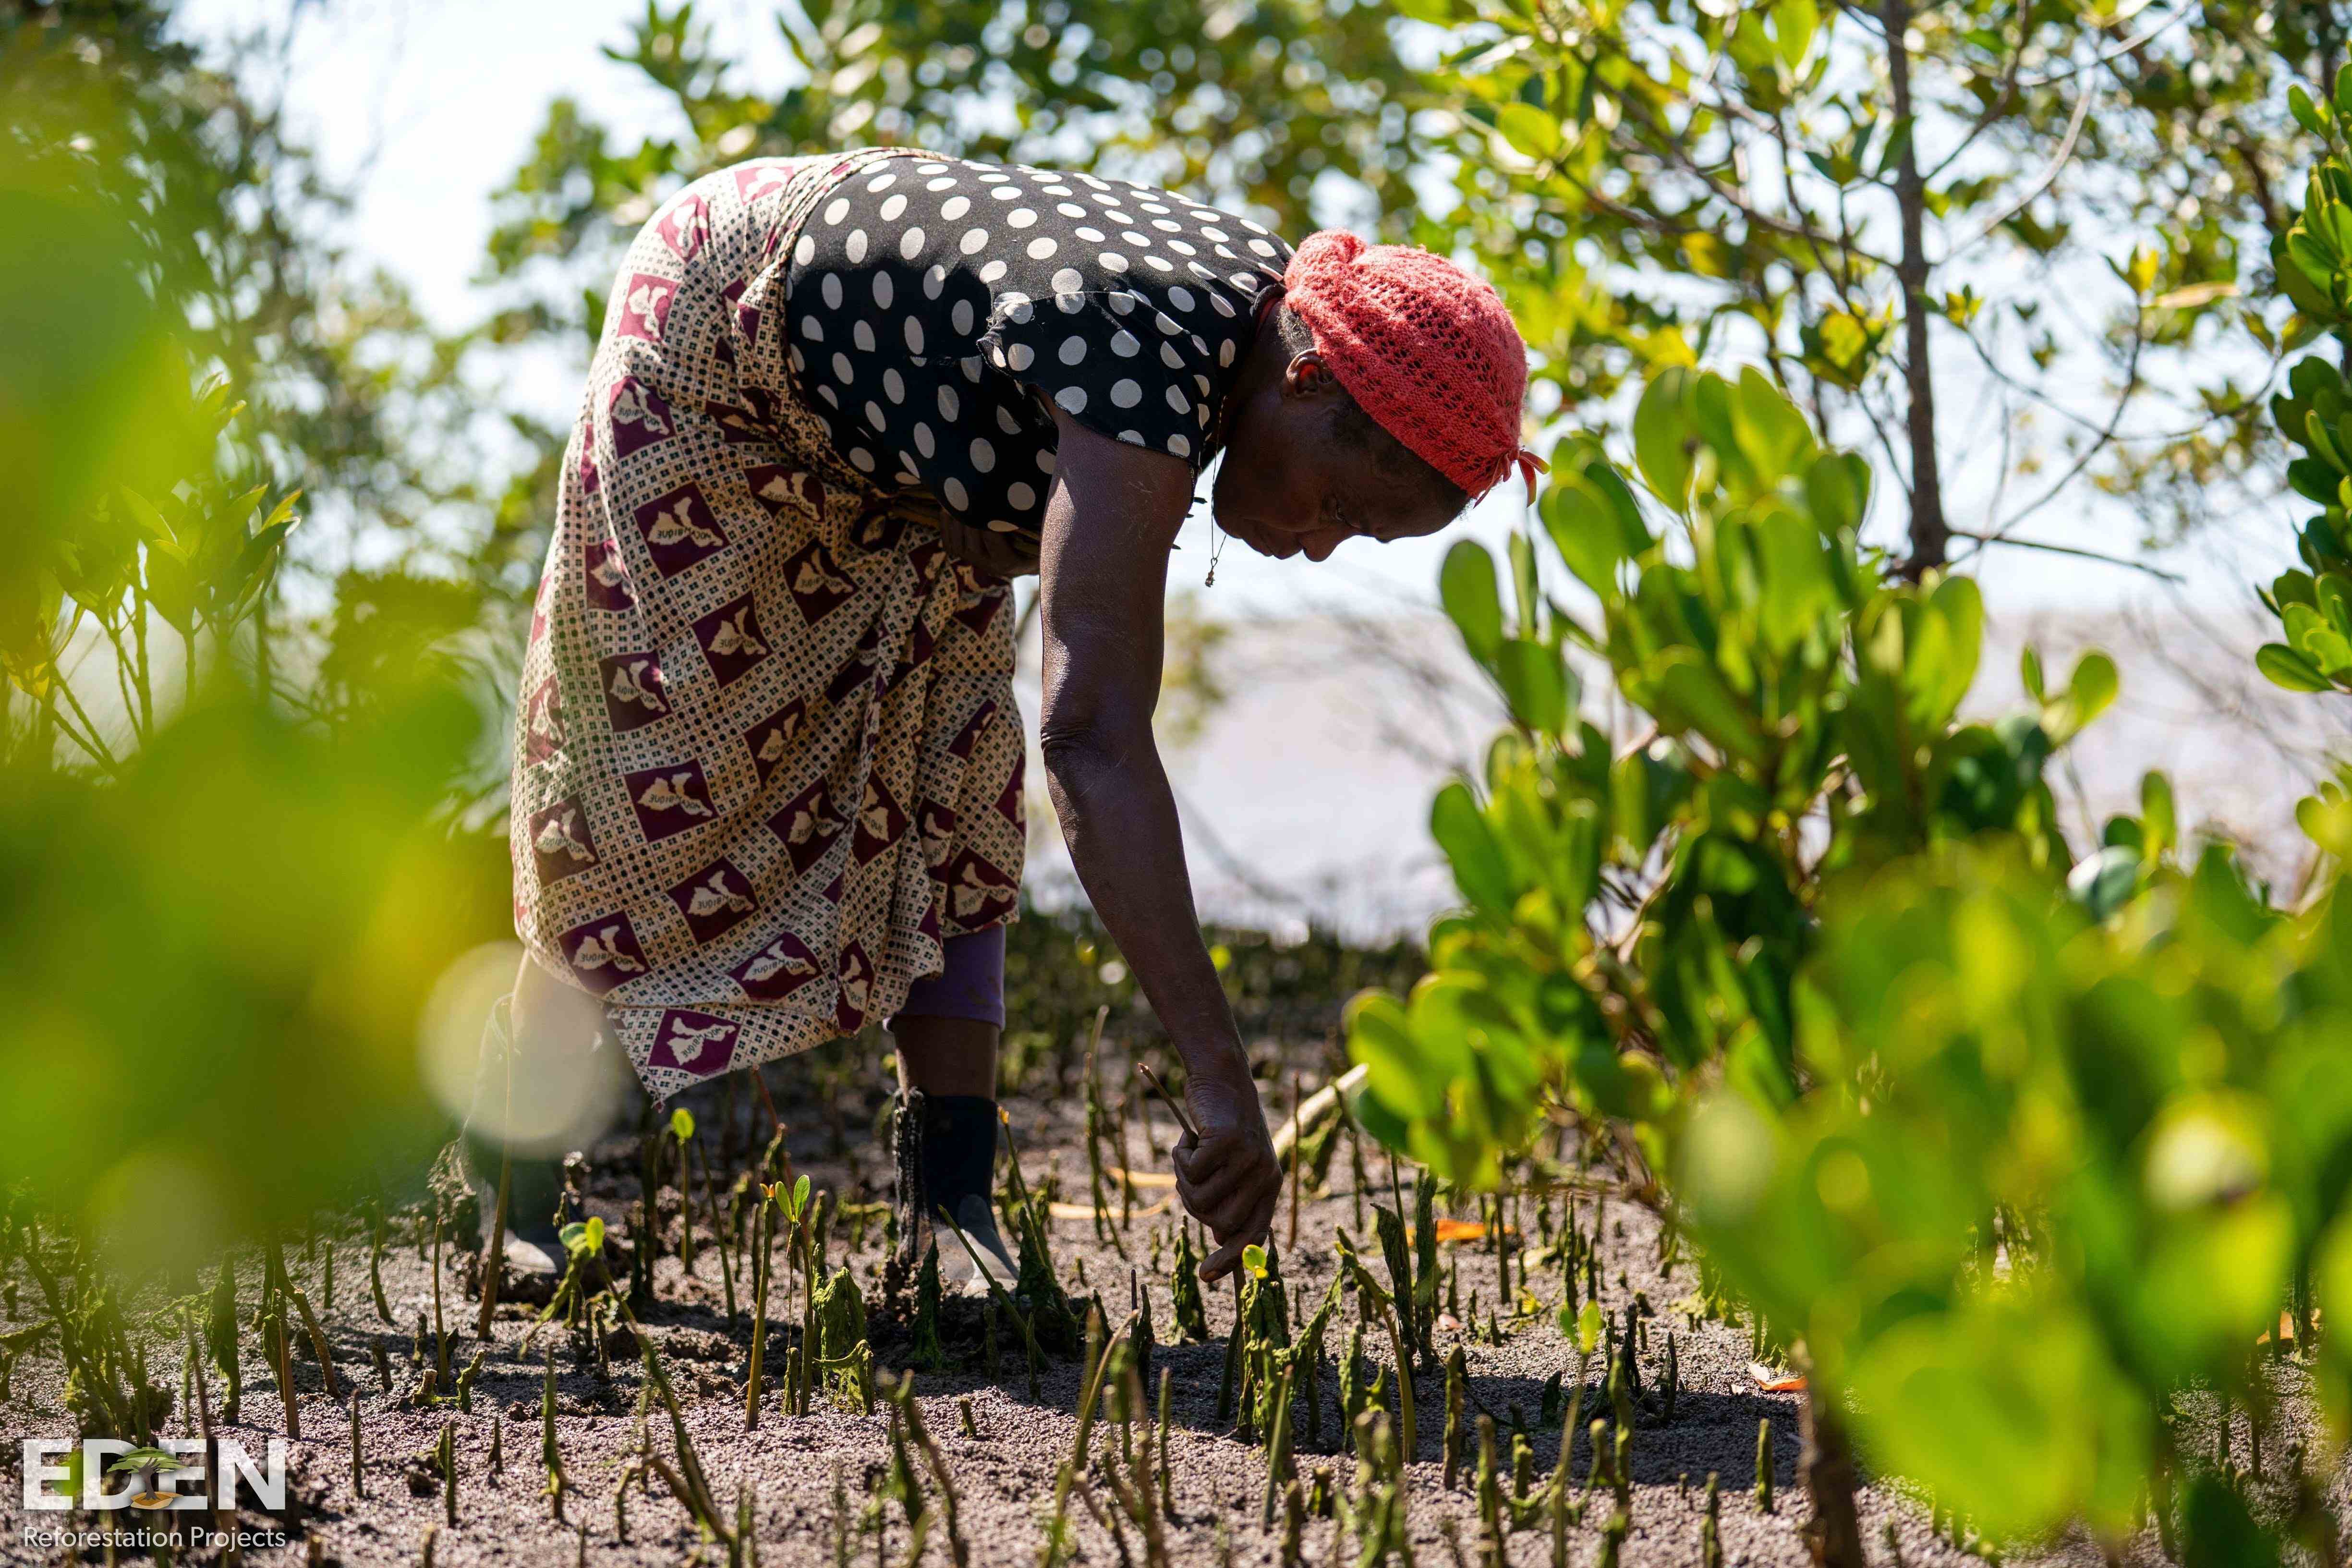 Local worker planting Mangrove seedlings at a planting site in Mozambique